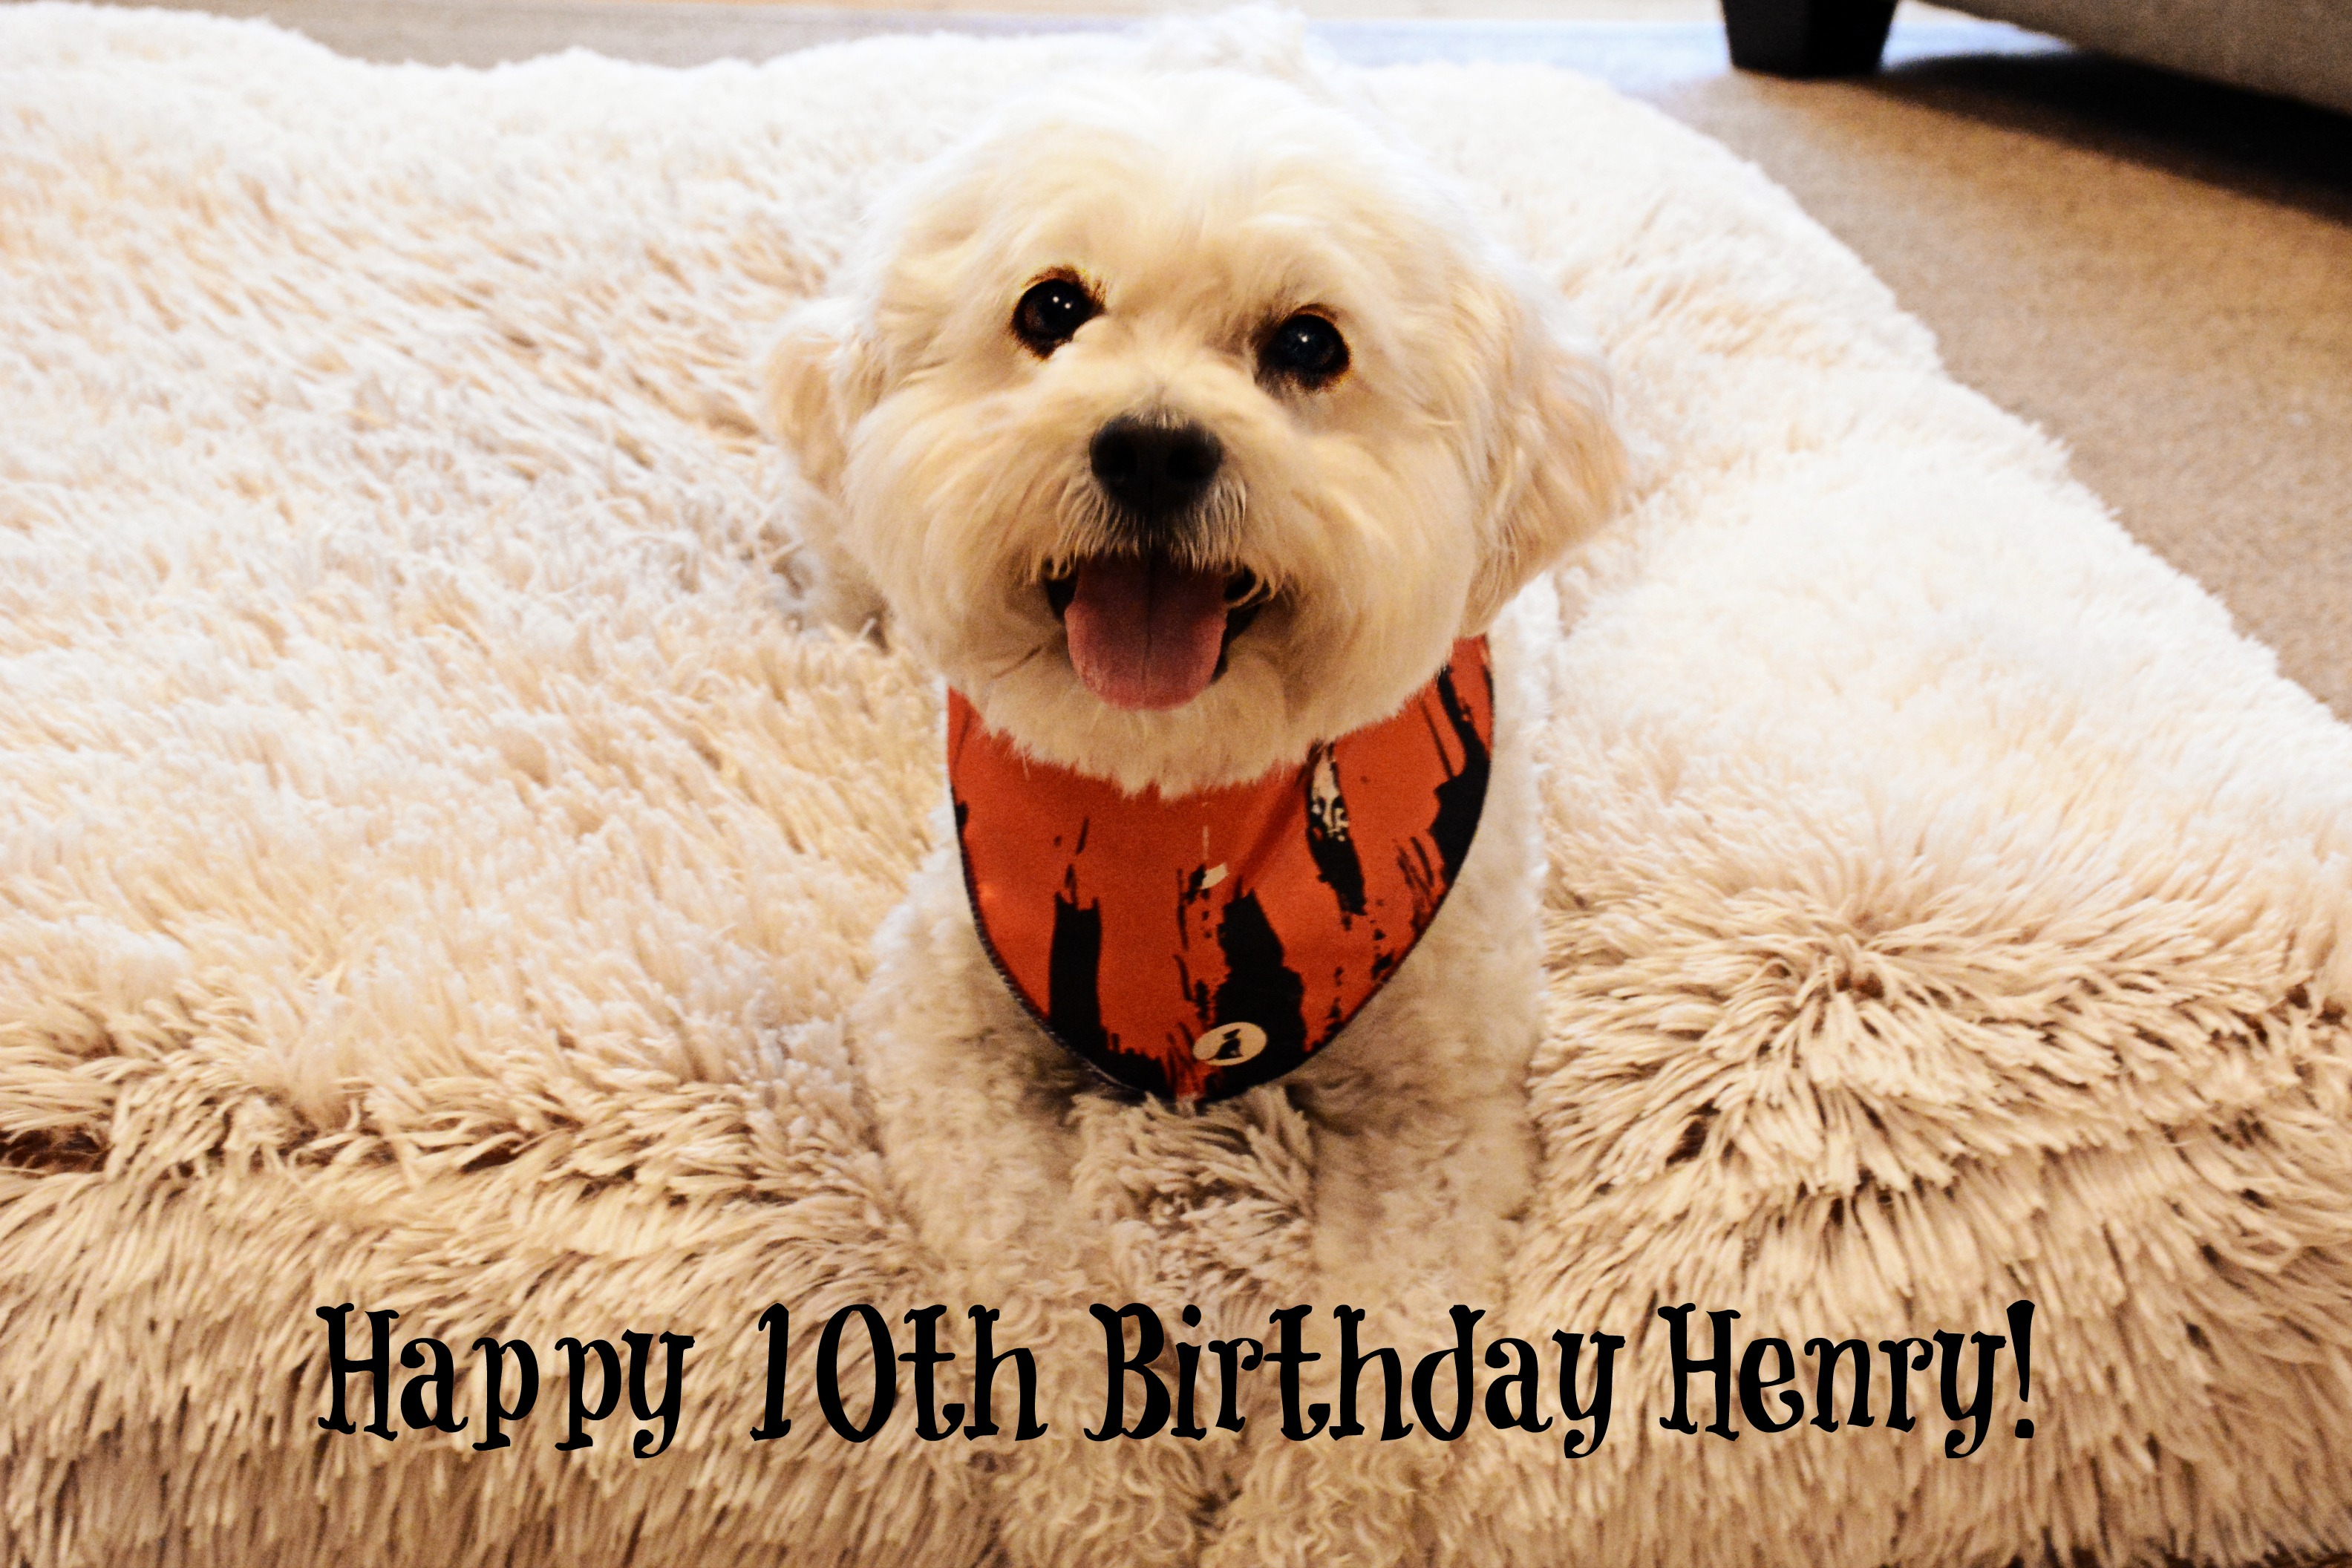 Henry is 10!